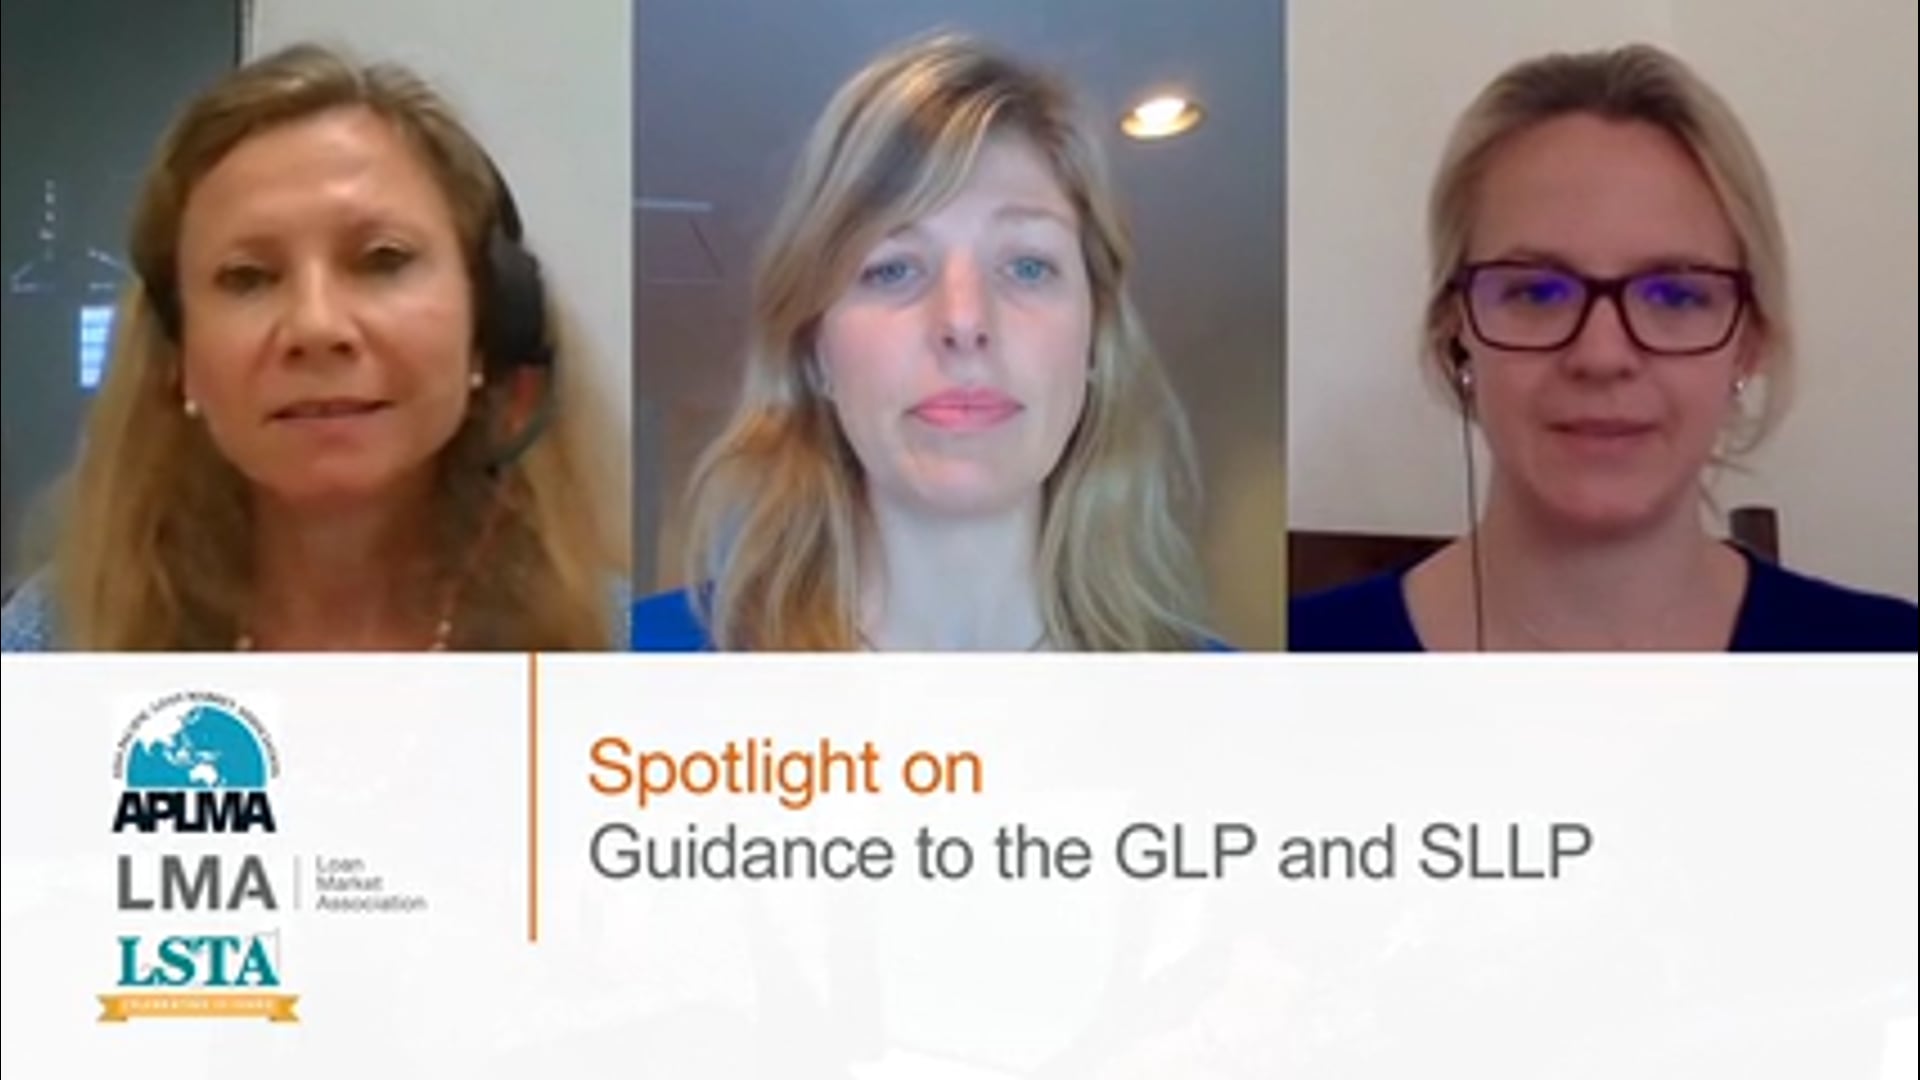 Video Spotlight on Guidance to the GLP and SLLP